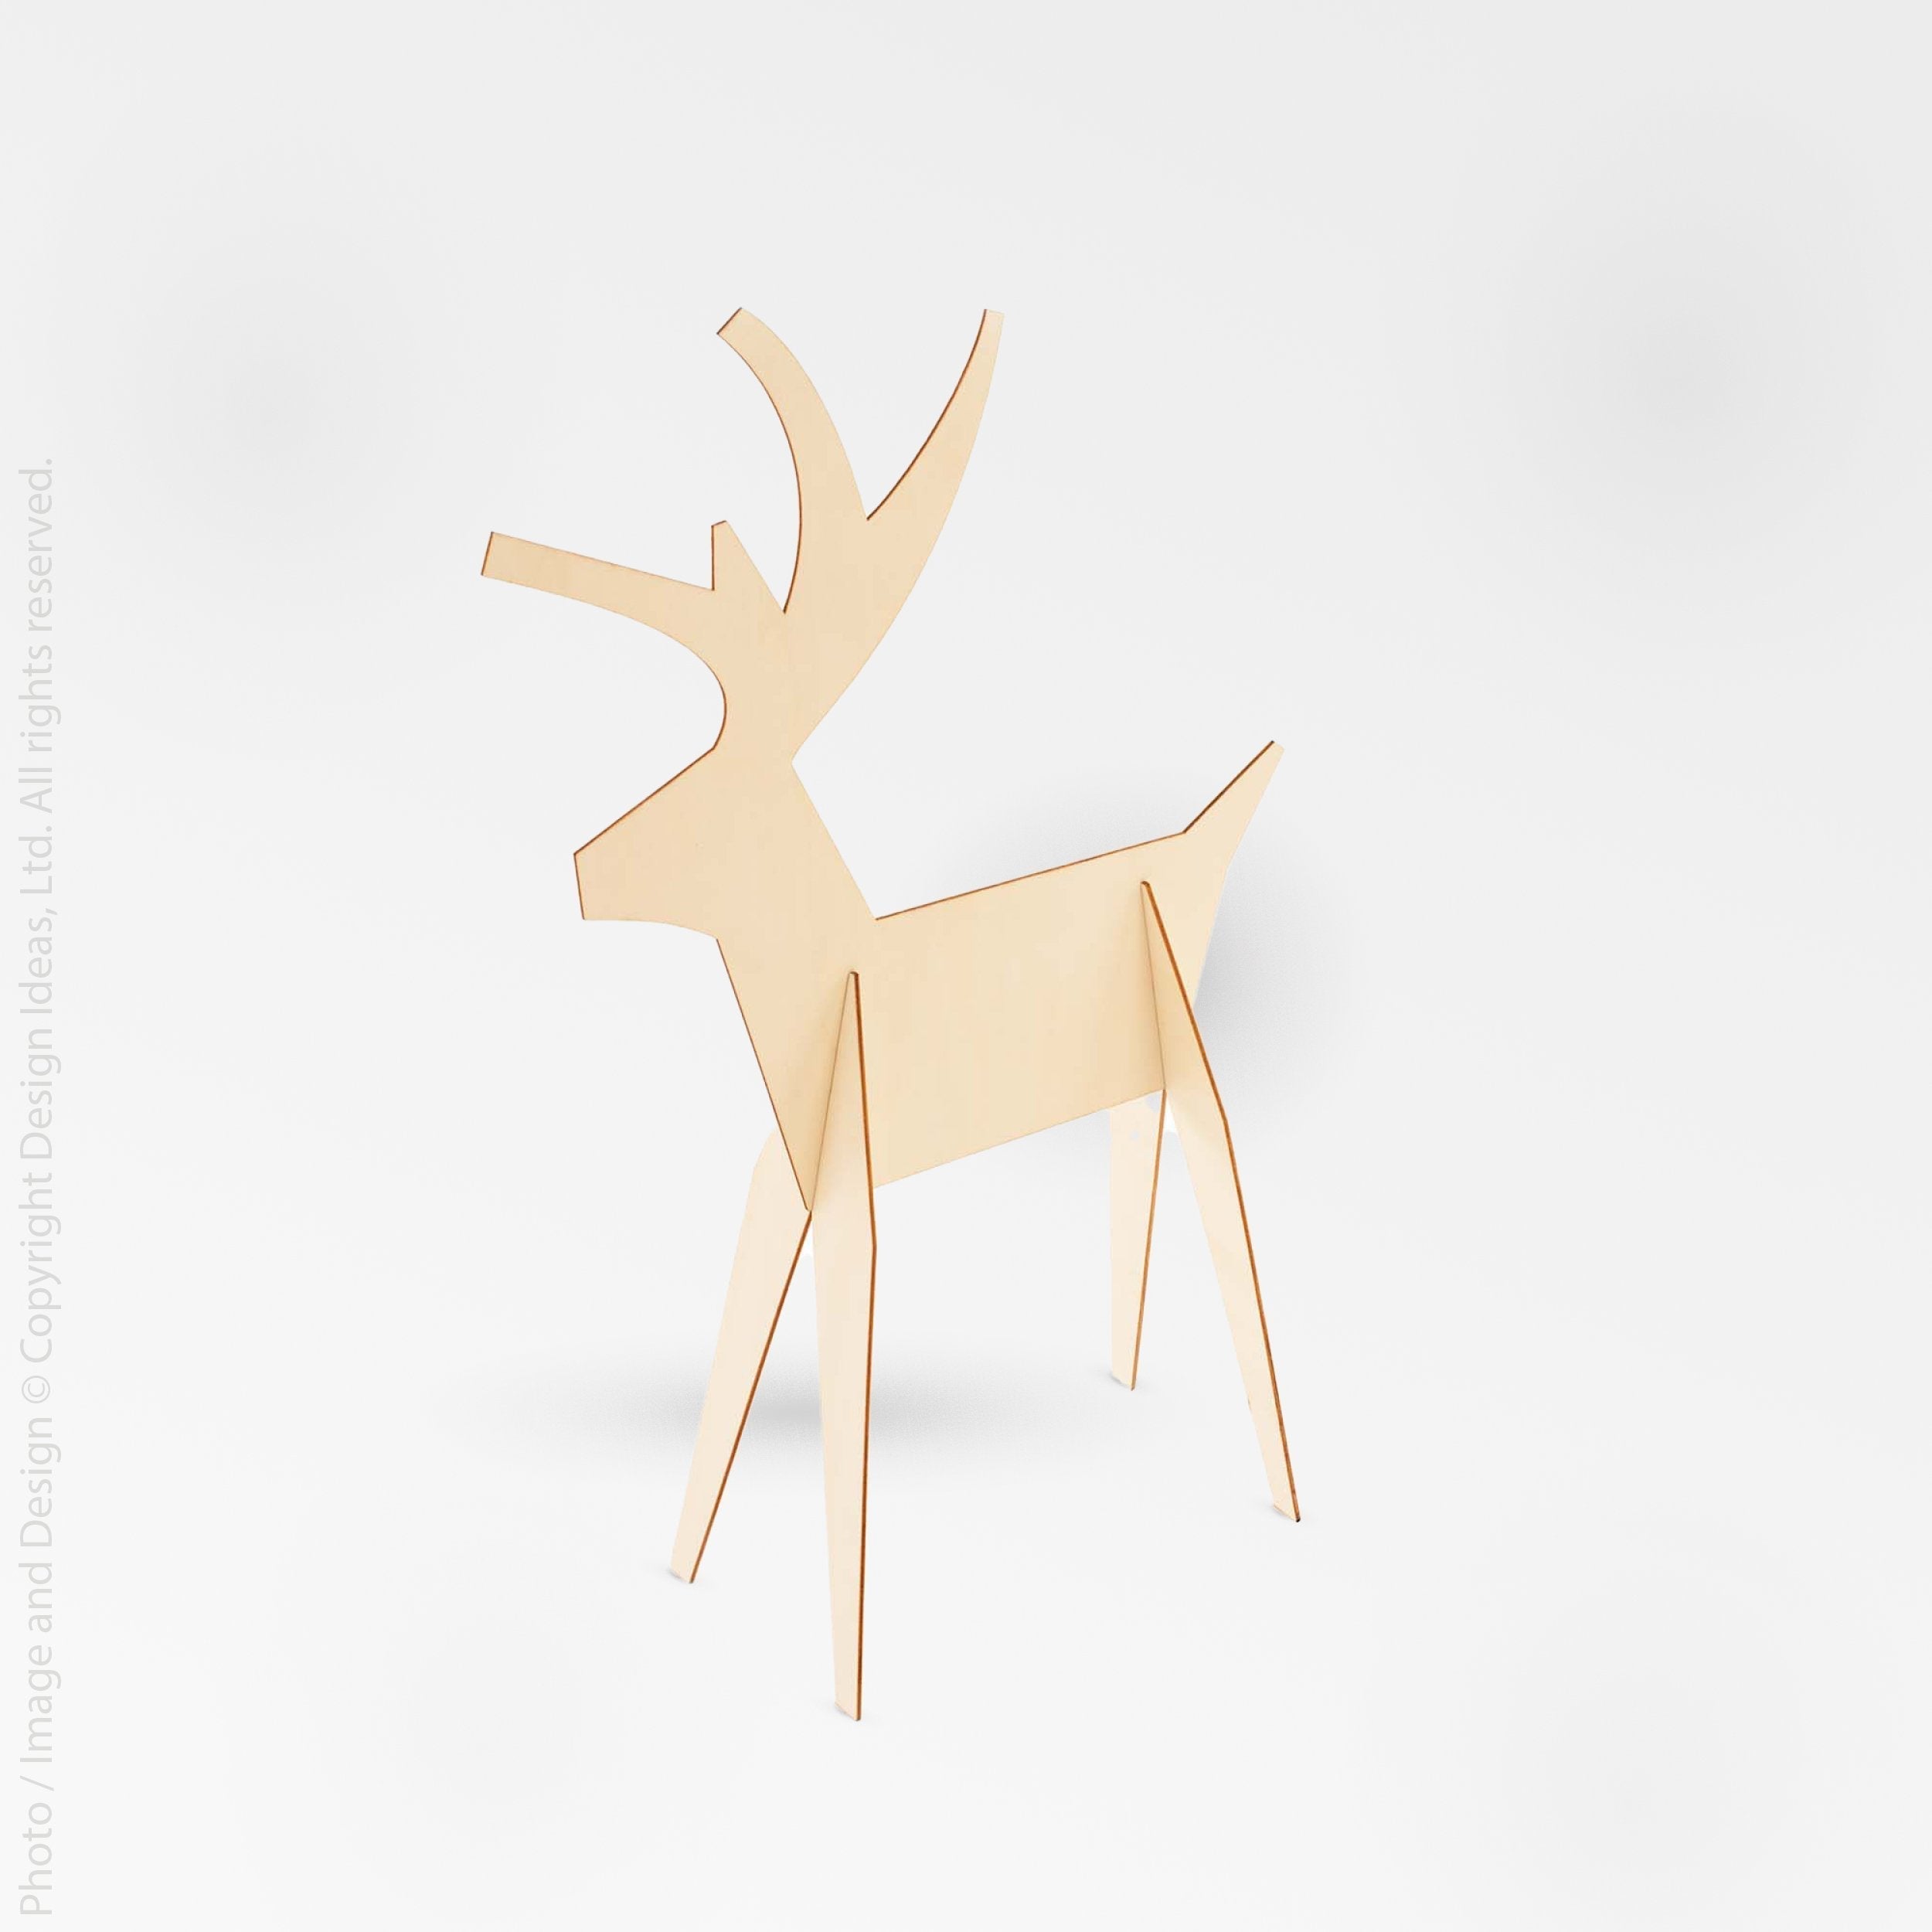 Alpine Wood Reindeer (Large) - white color | Image 1 | From the Alpine Collection | Elegantly handmade with natural wood for long lasting use | Available in white color | texxture home